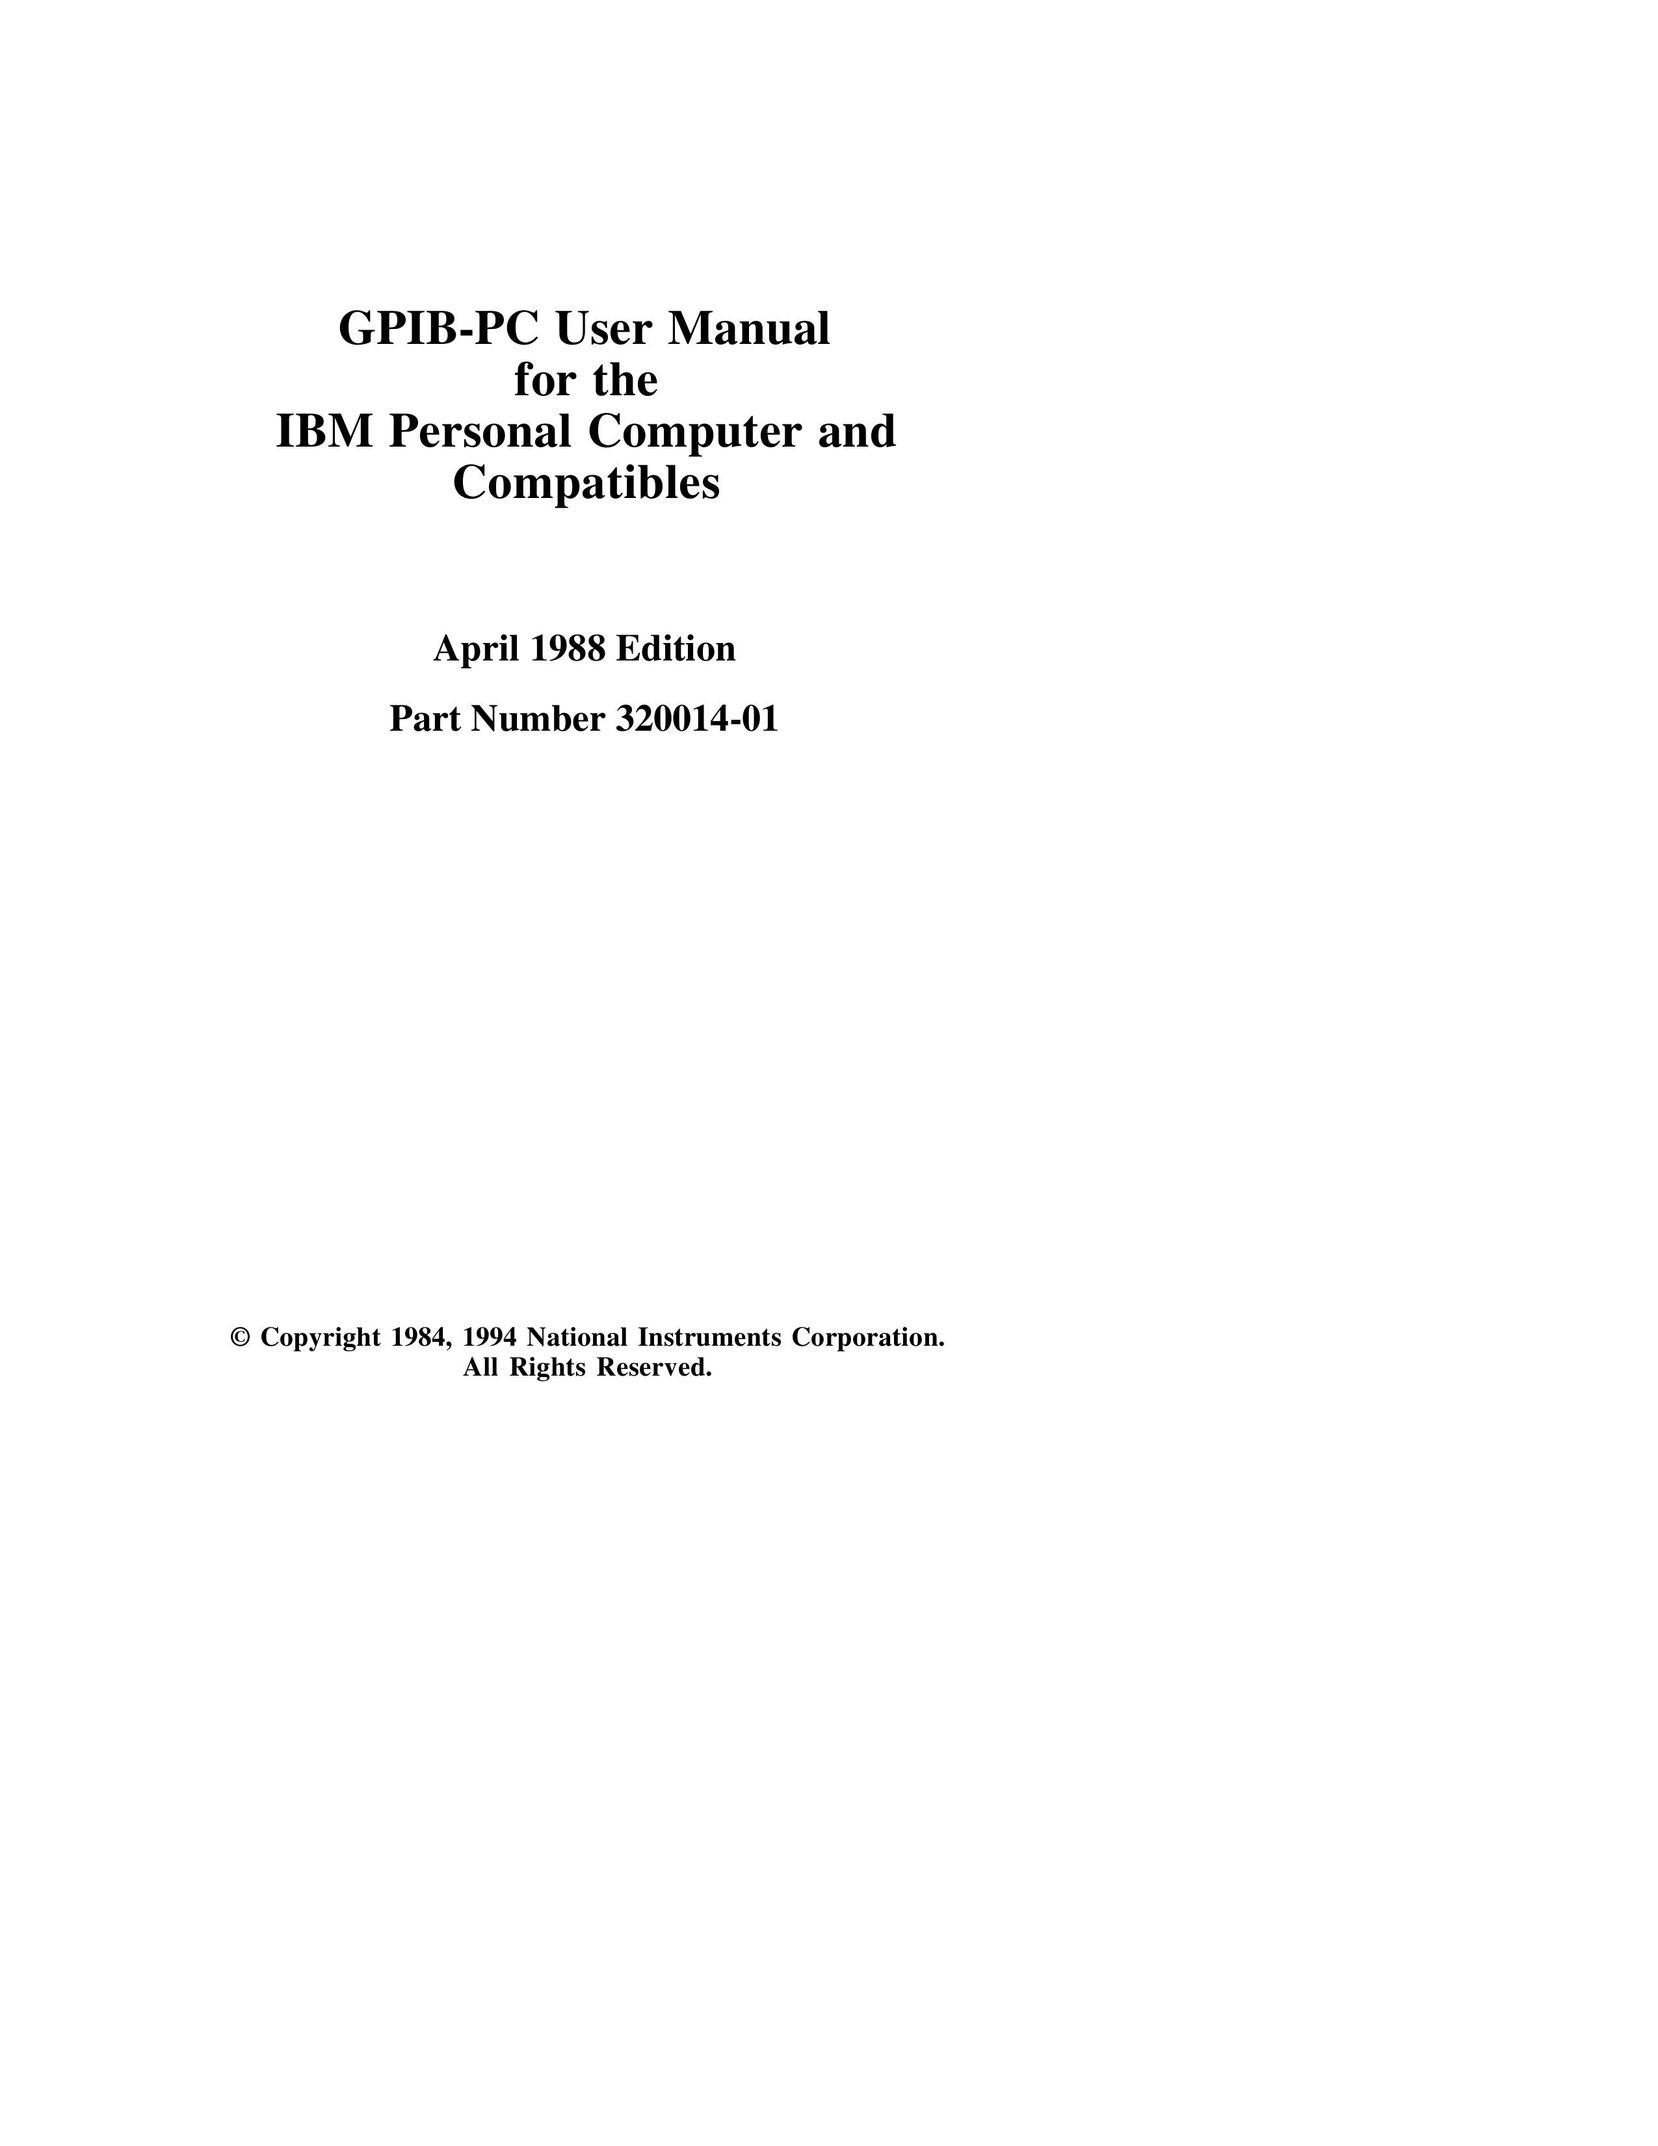 National Instruments GPIB-PC Network Card User Manual